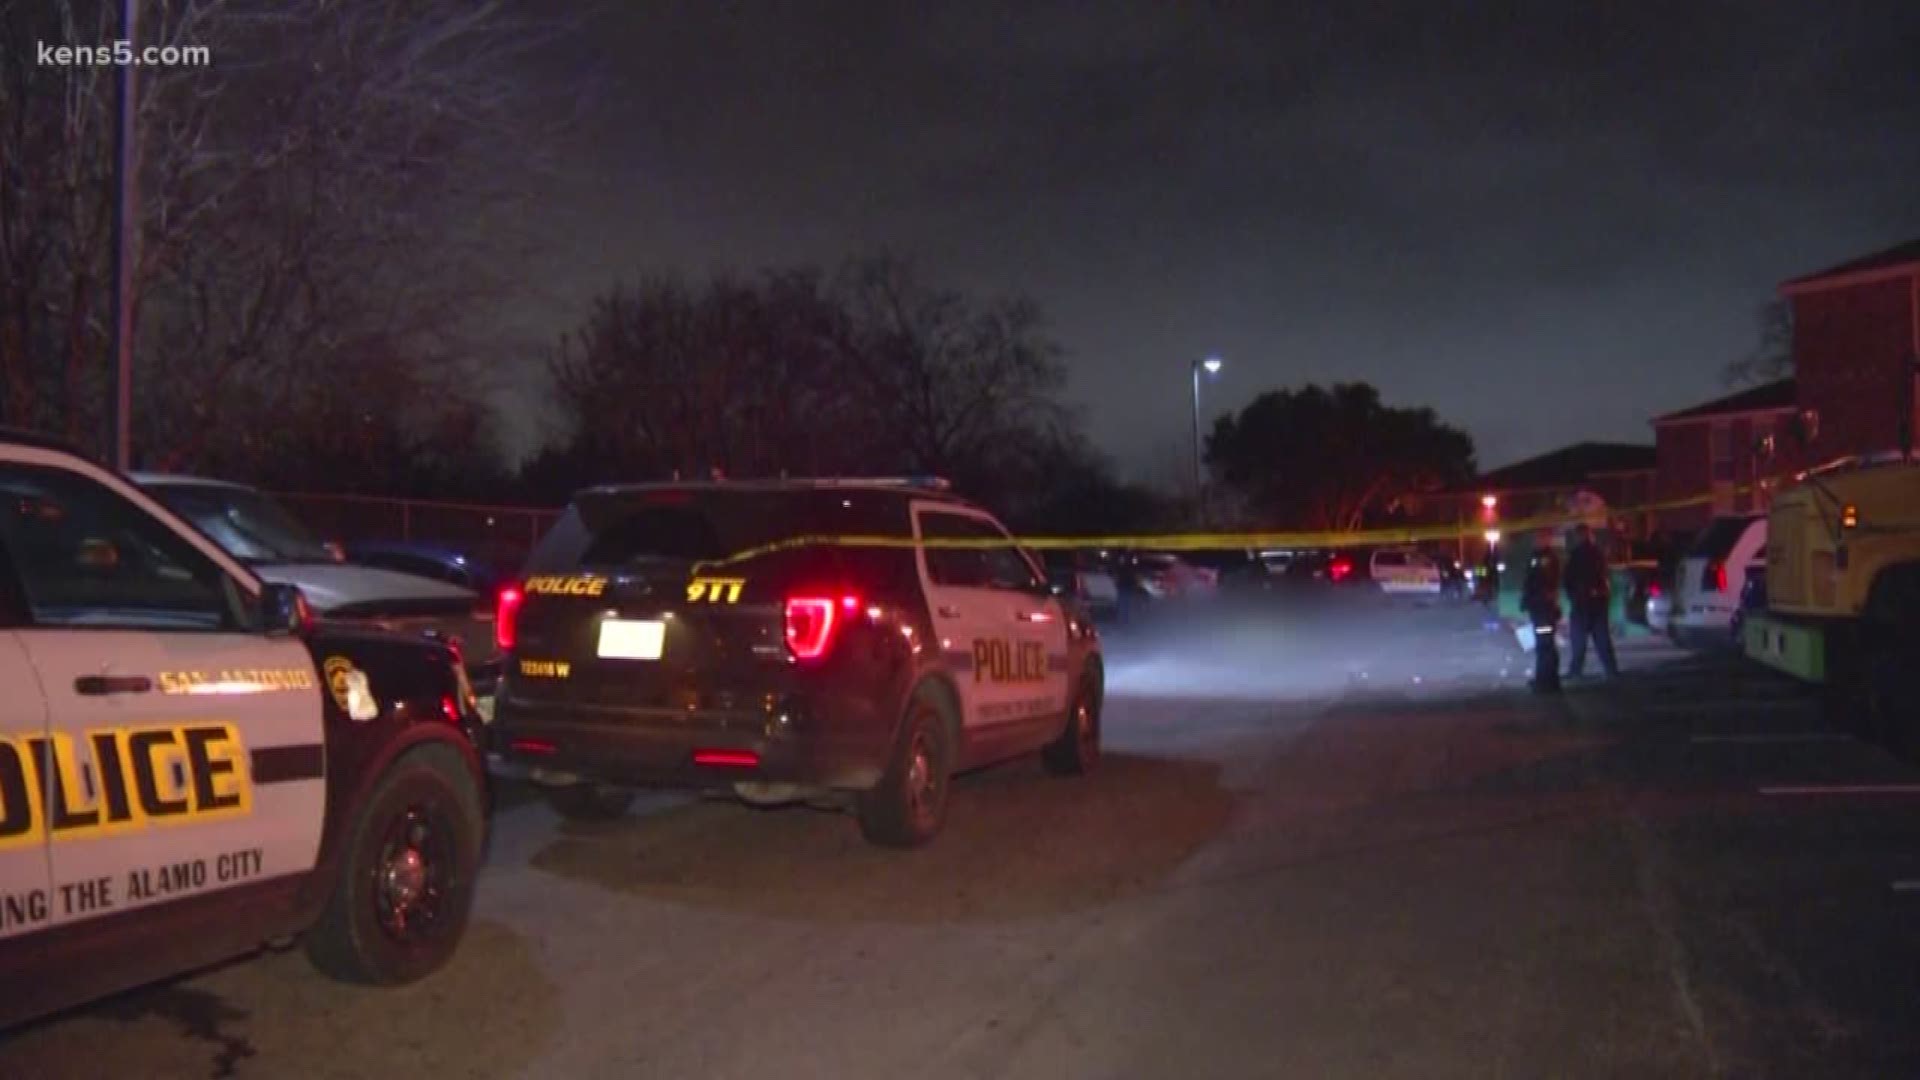 San Antonio Police are investigating a fatal shooting on the city's west side overnight.